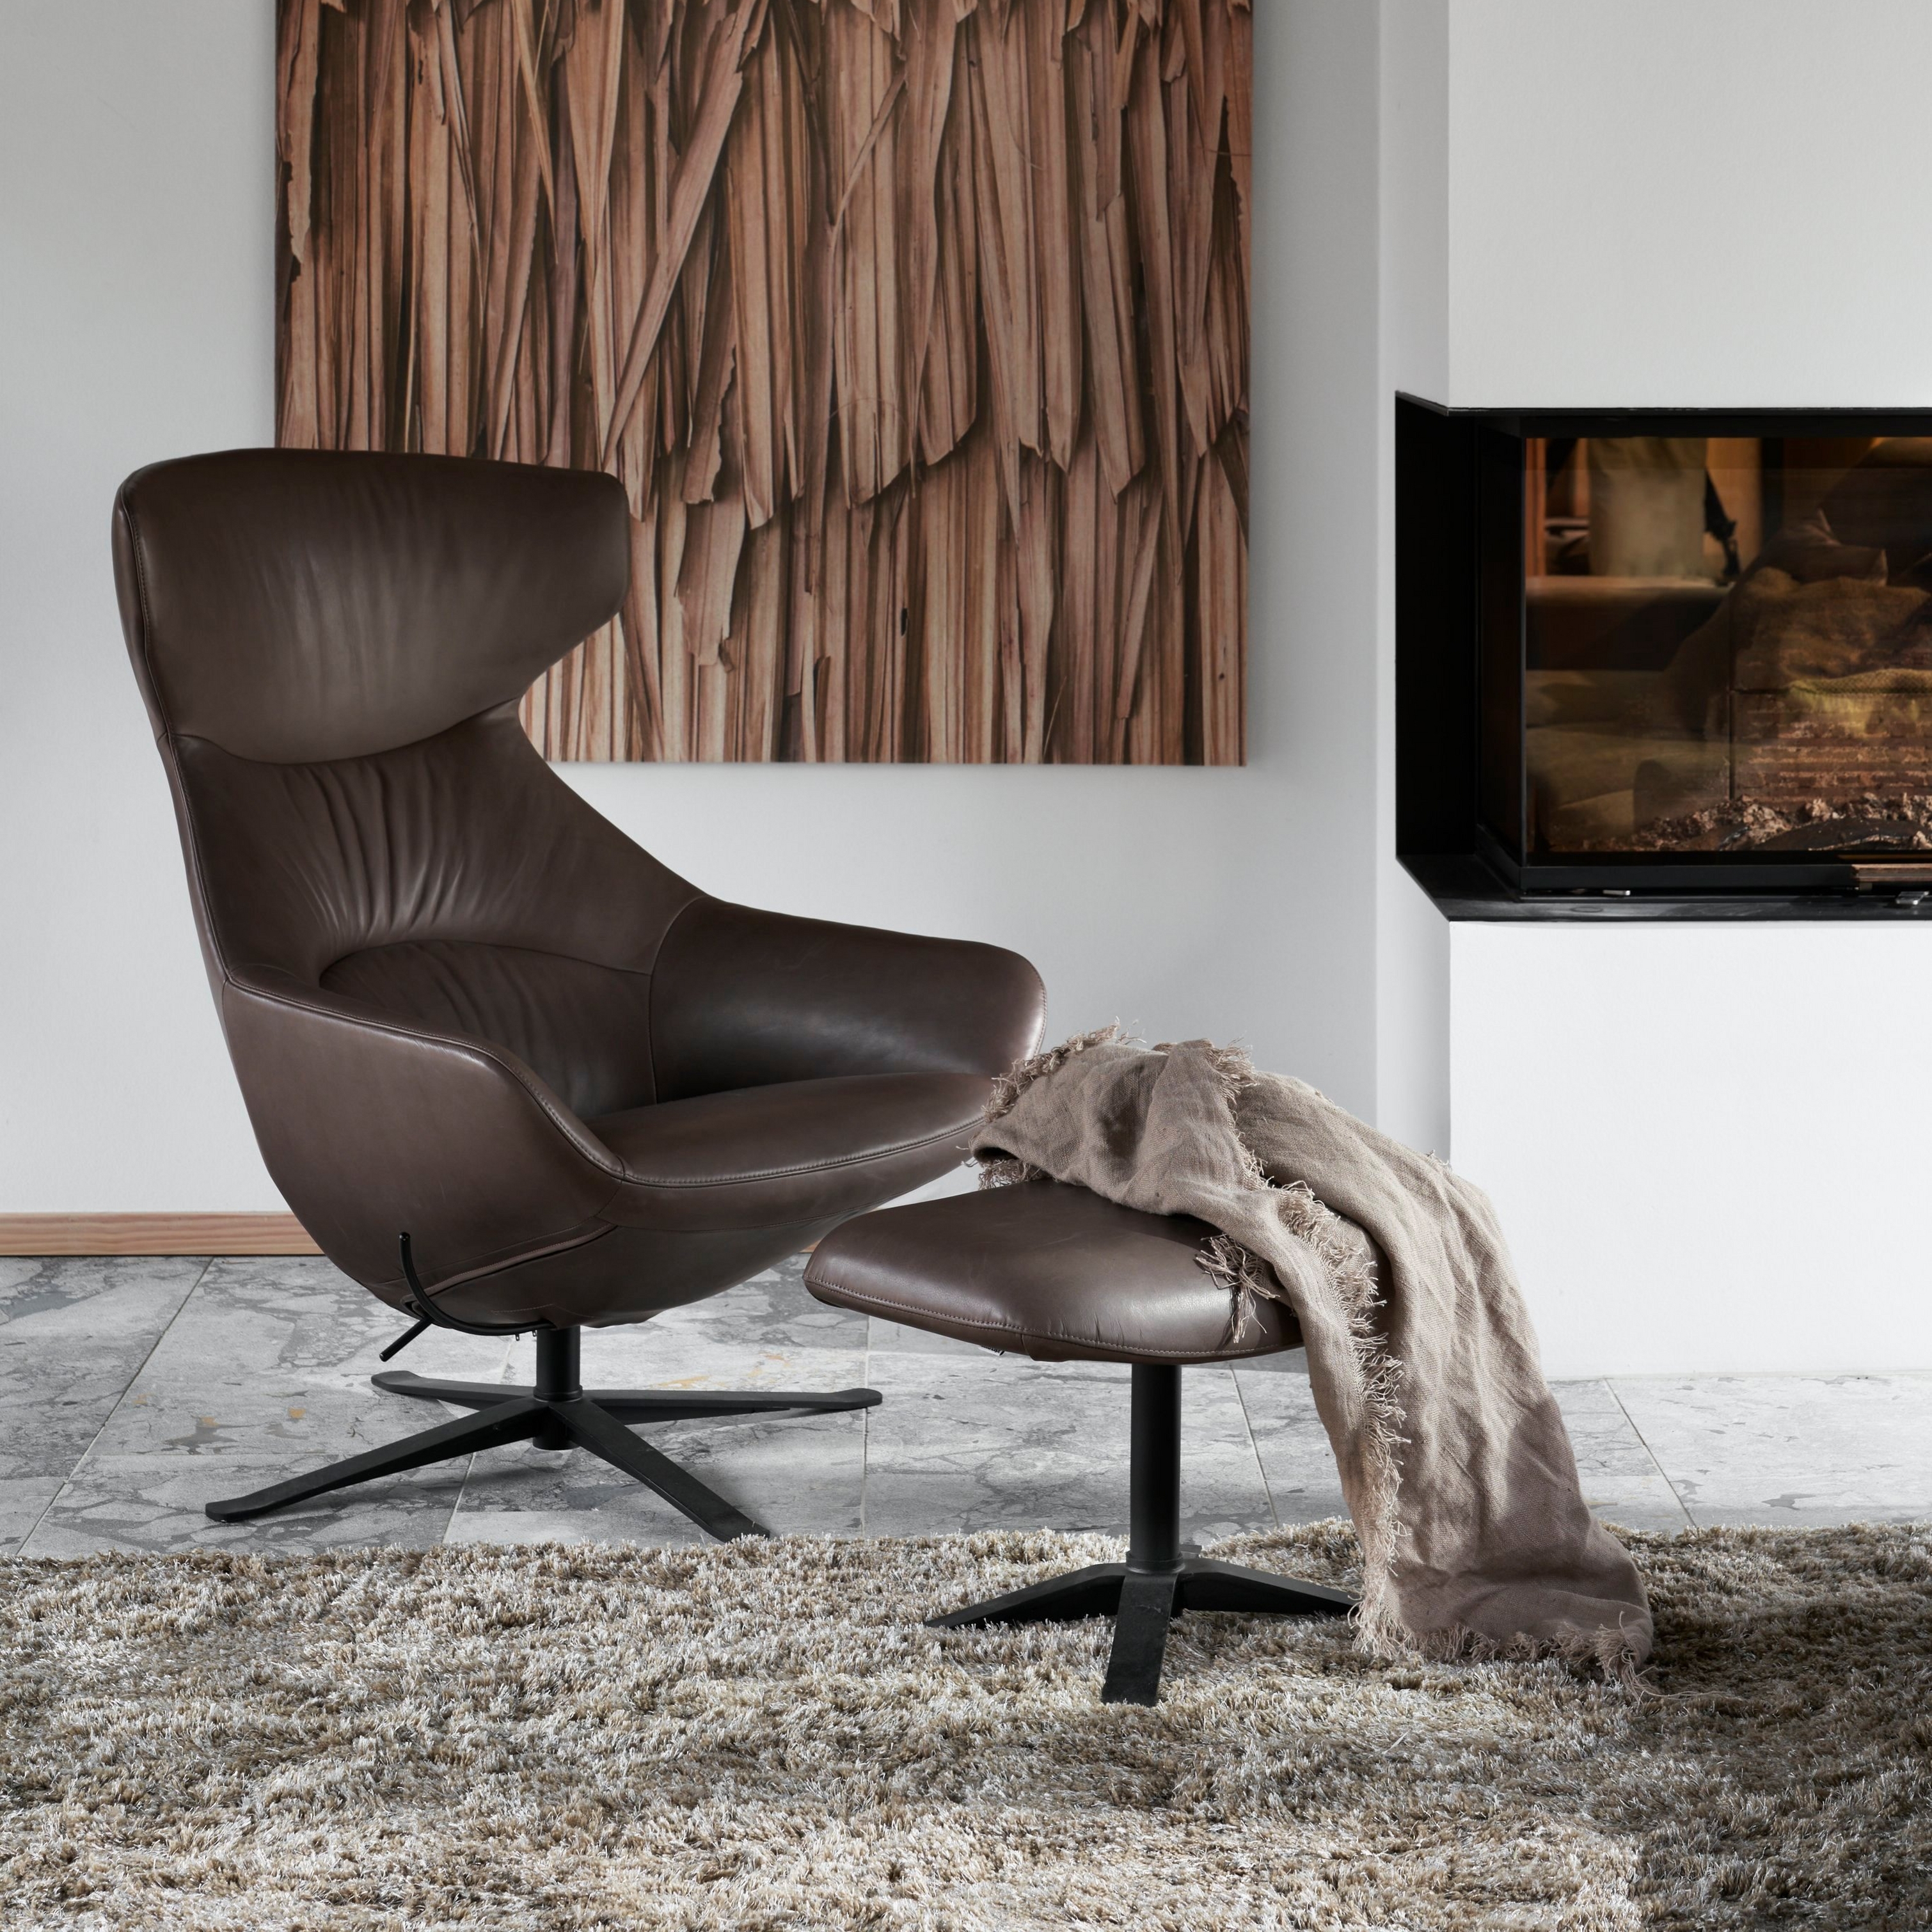 Modern brown leather chair with ottoman, shag rug, wooden art and fireplace